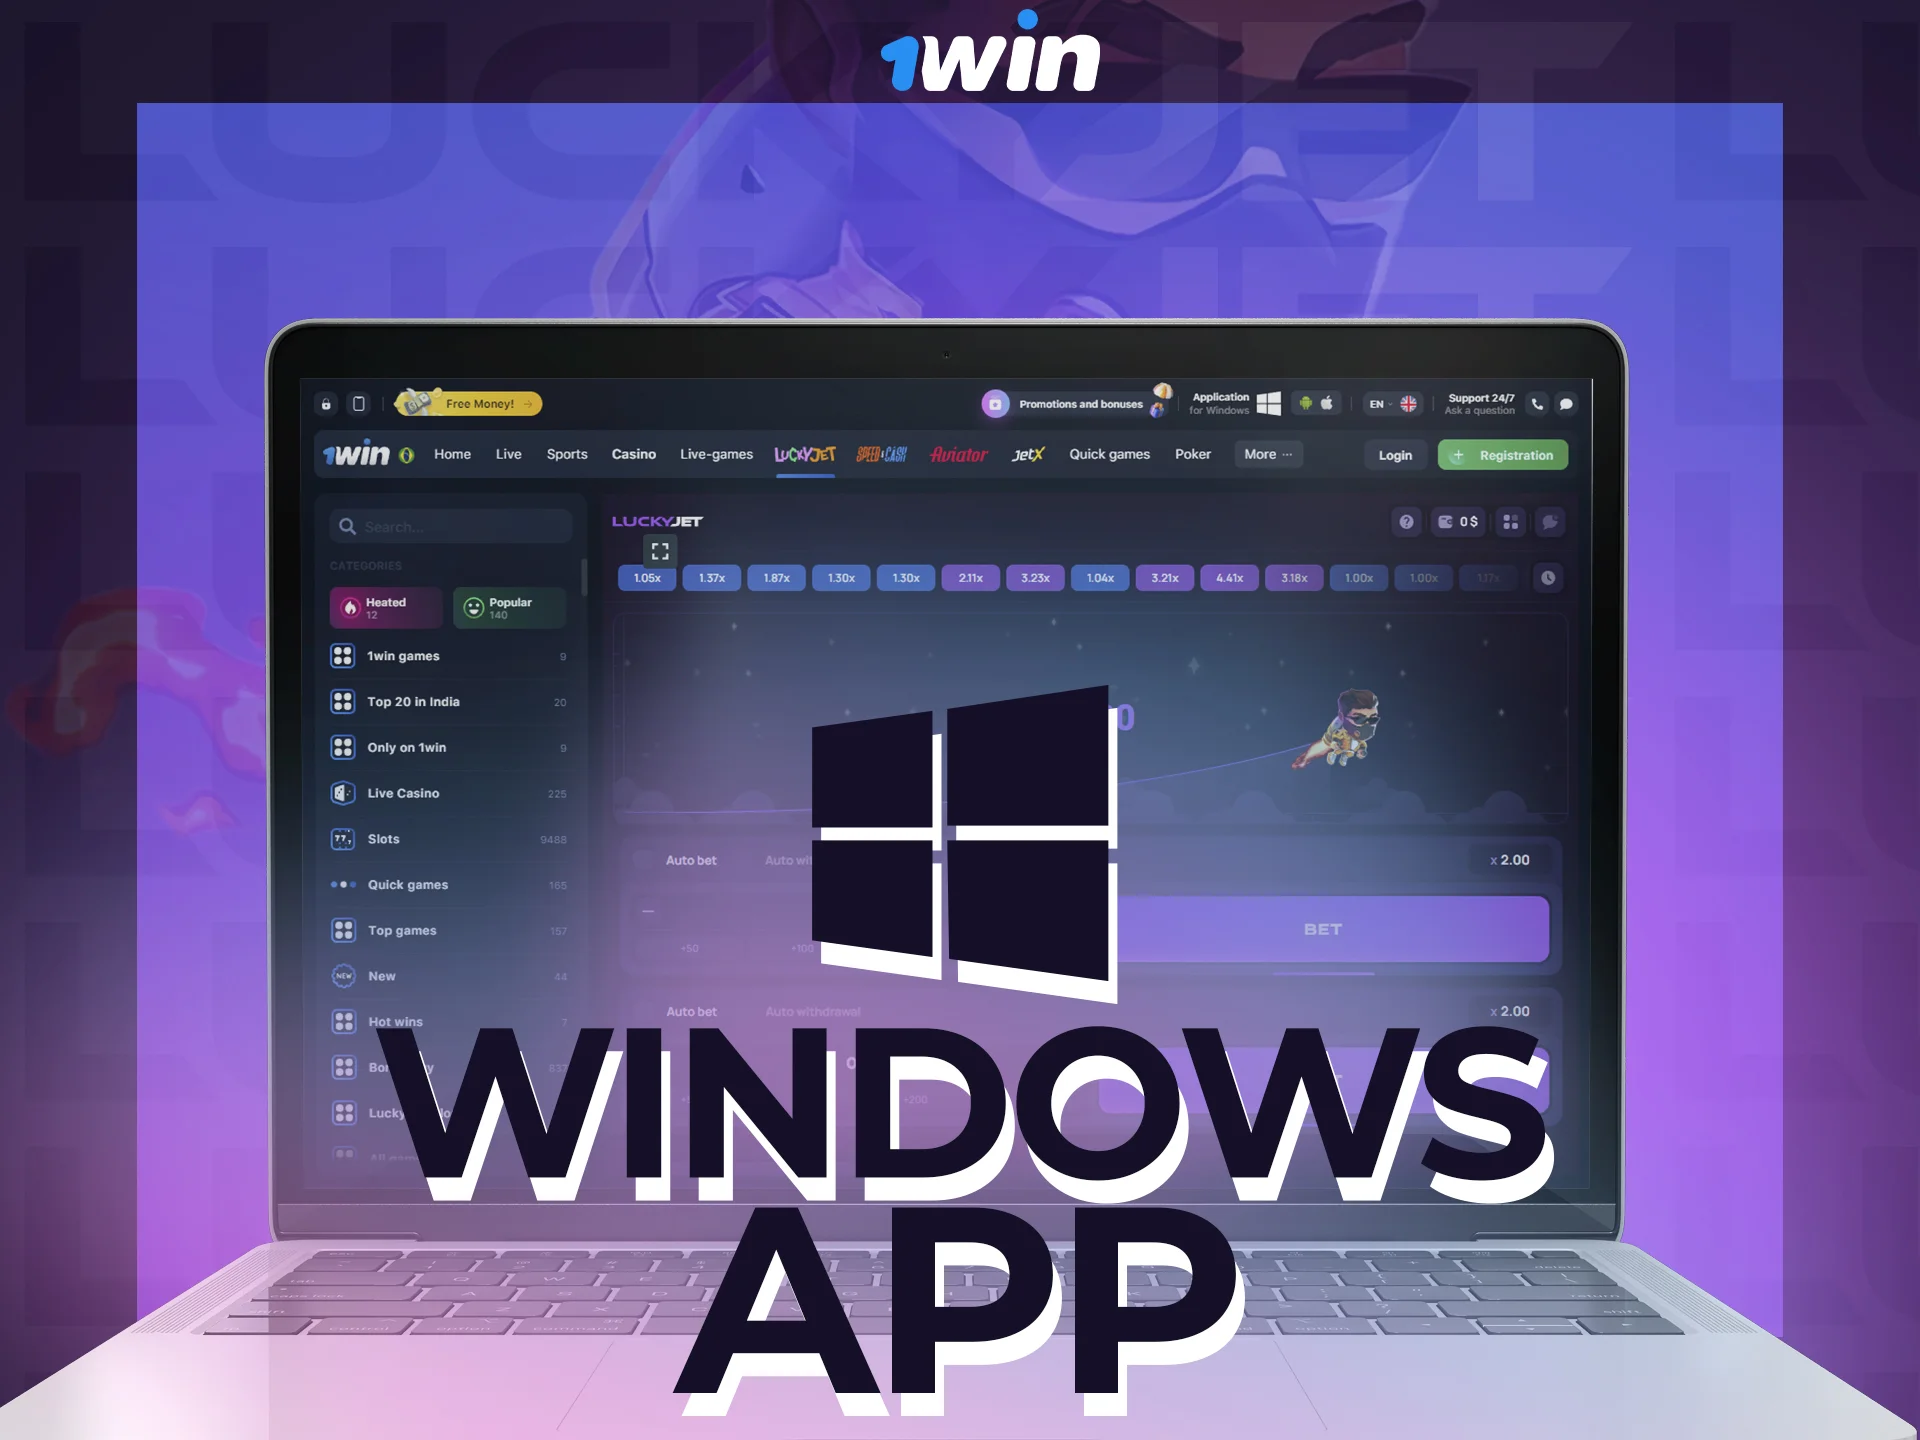 To play Lucky Jet on 1win has a handy application for Windows.